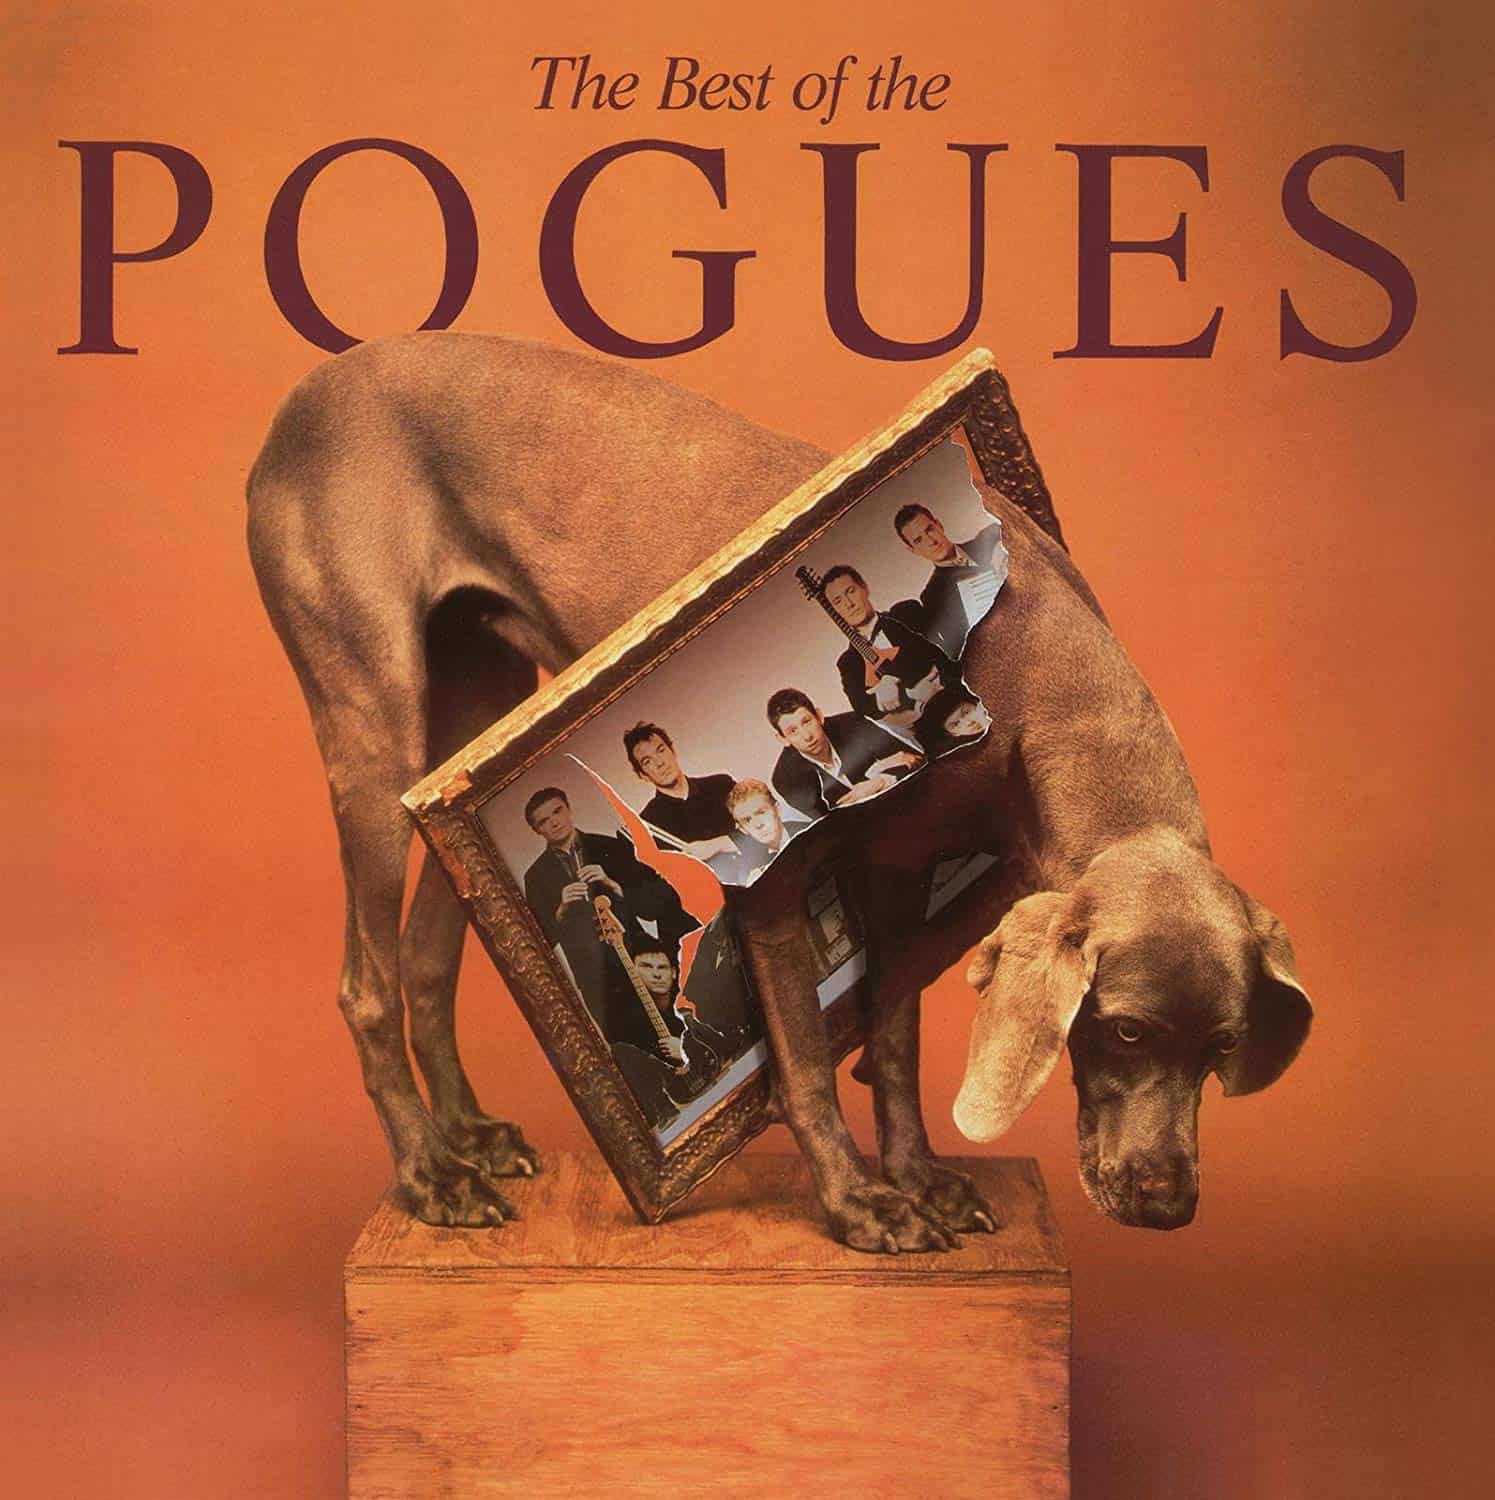 the-pogues-best-of-the-pogues-vinyl-record-album-1